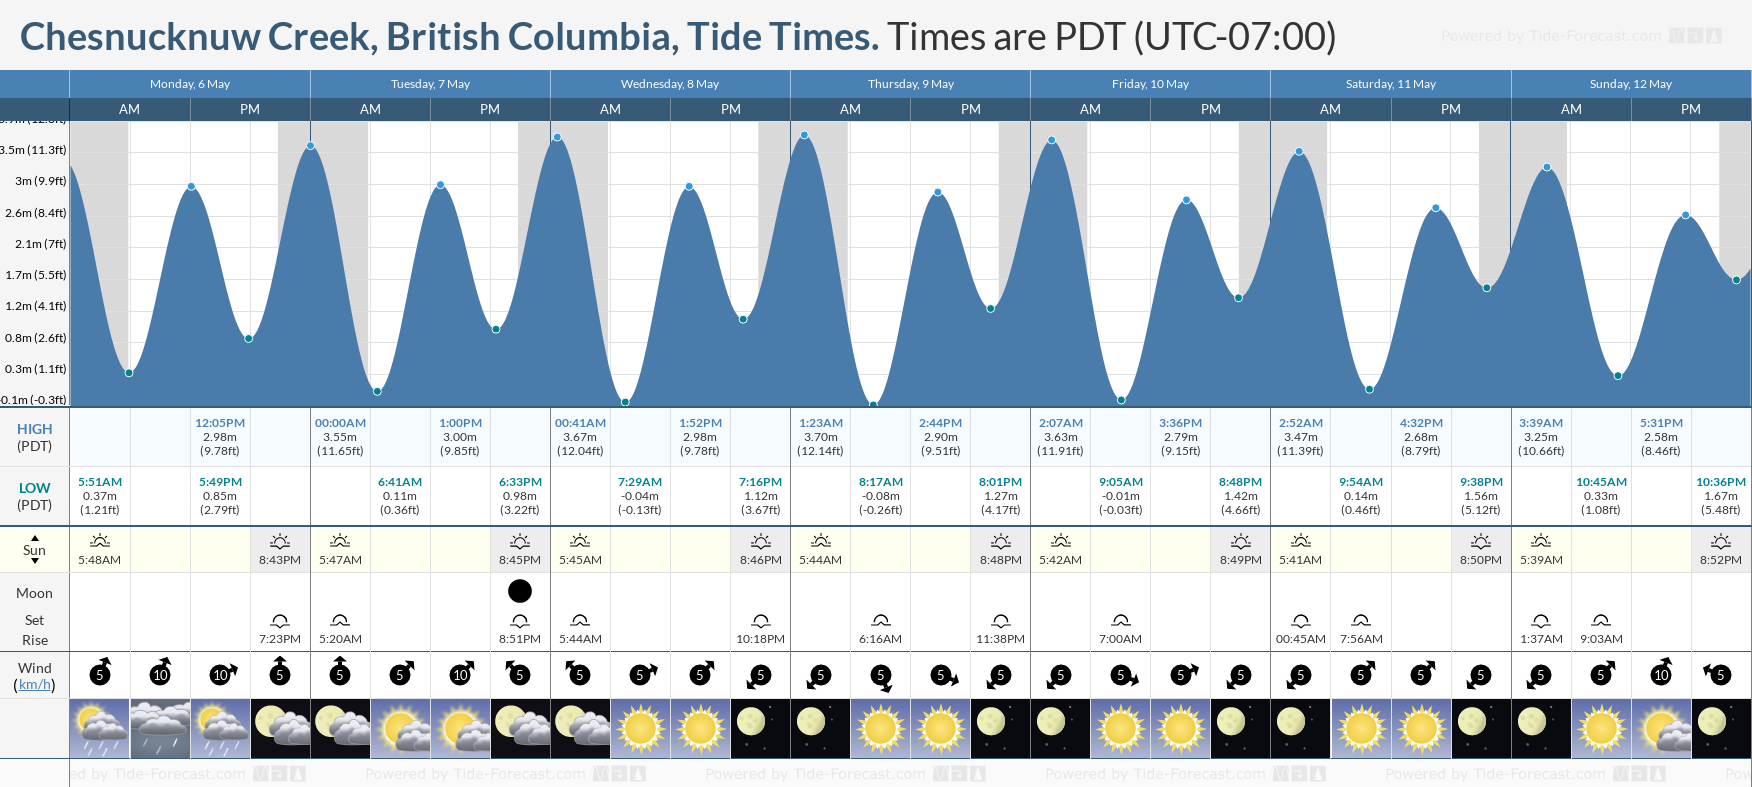 Chesnucknuw Creek, British Columbia Tide Chart including high and low tide tide times for the next 7 days